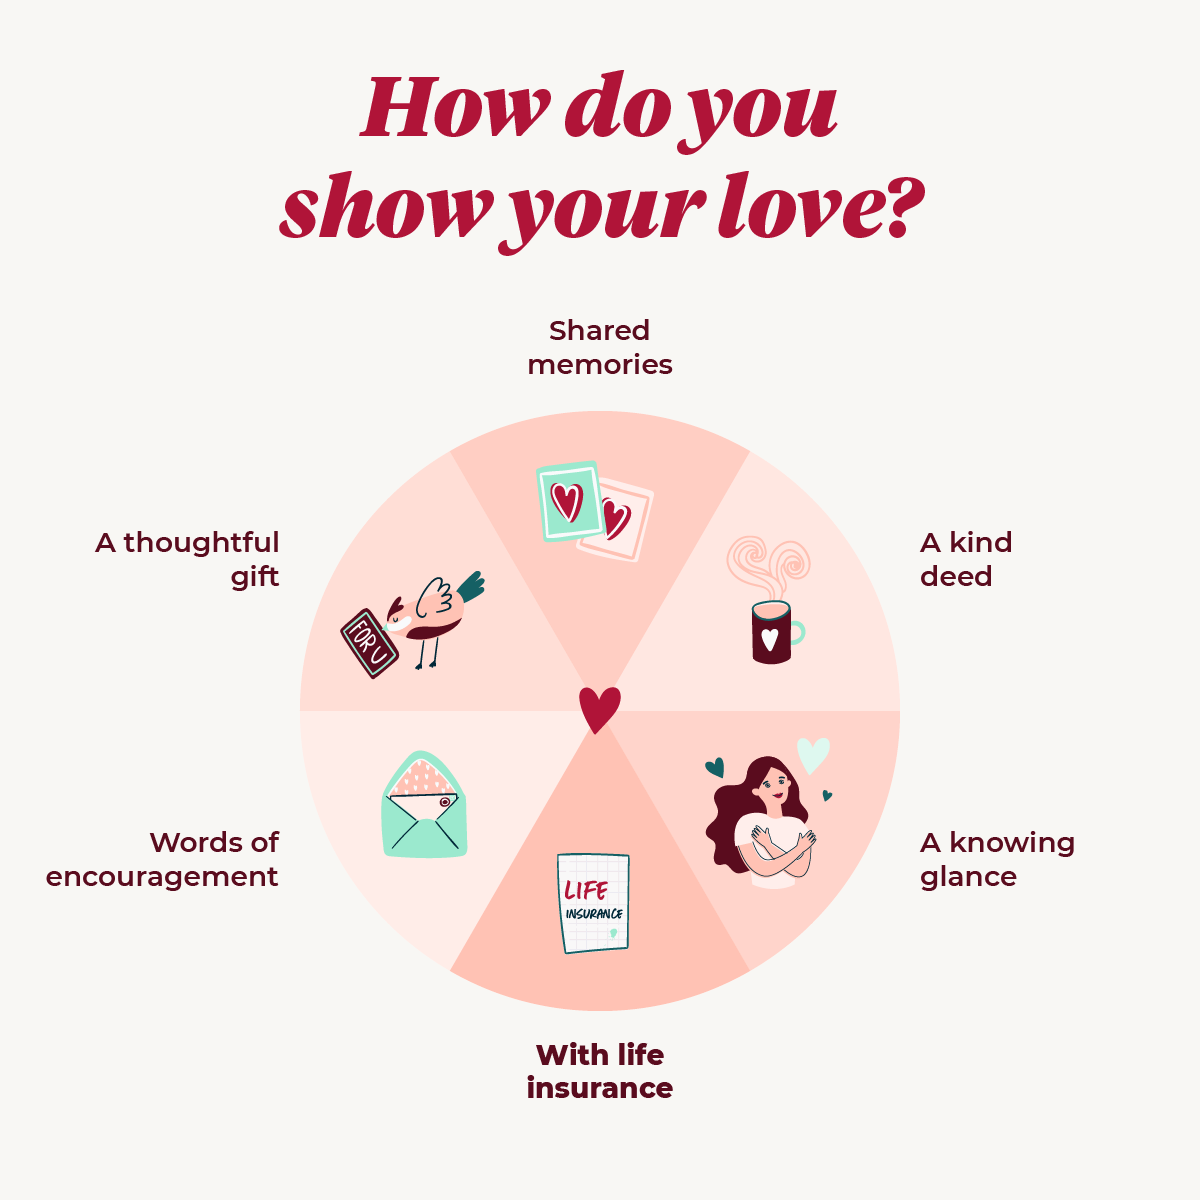 Pie chart illustration with "How do you show your love?"